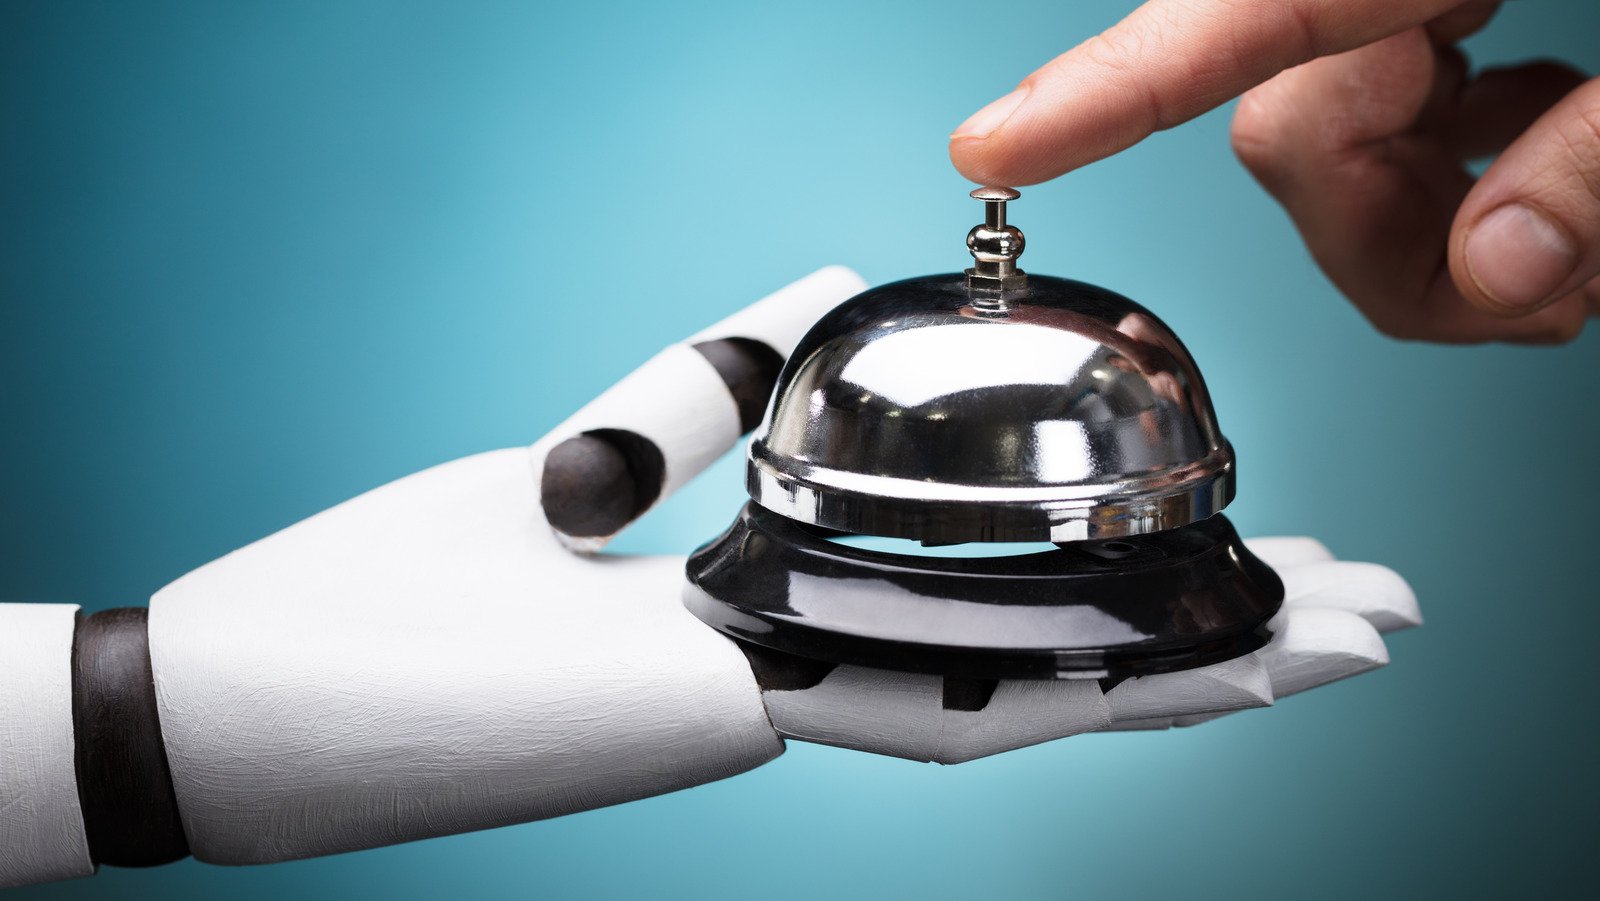 The Reason Some People Aren't Thrilled With Robot-Run Hotels - SlashGear